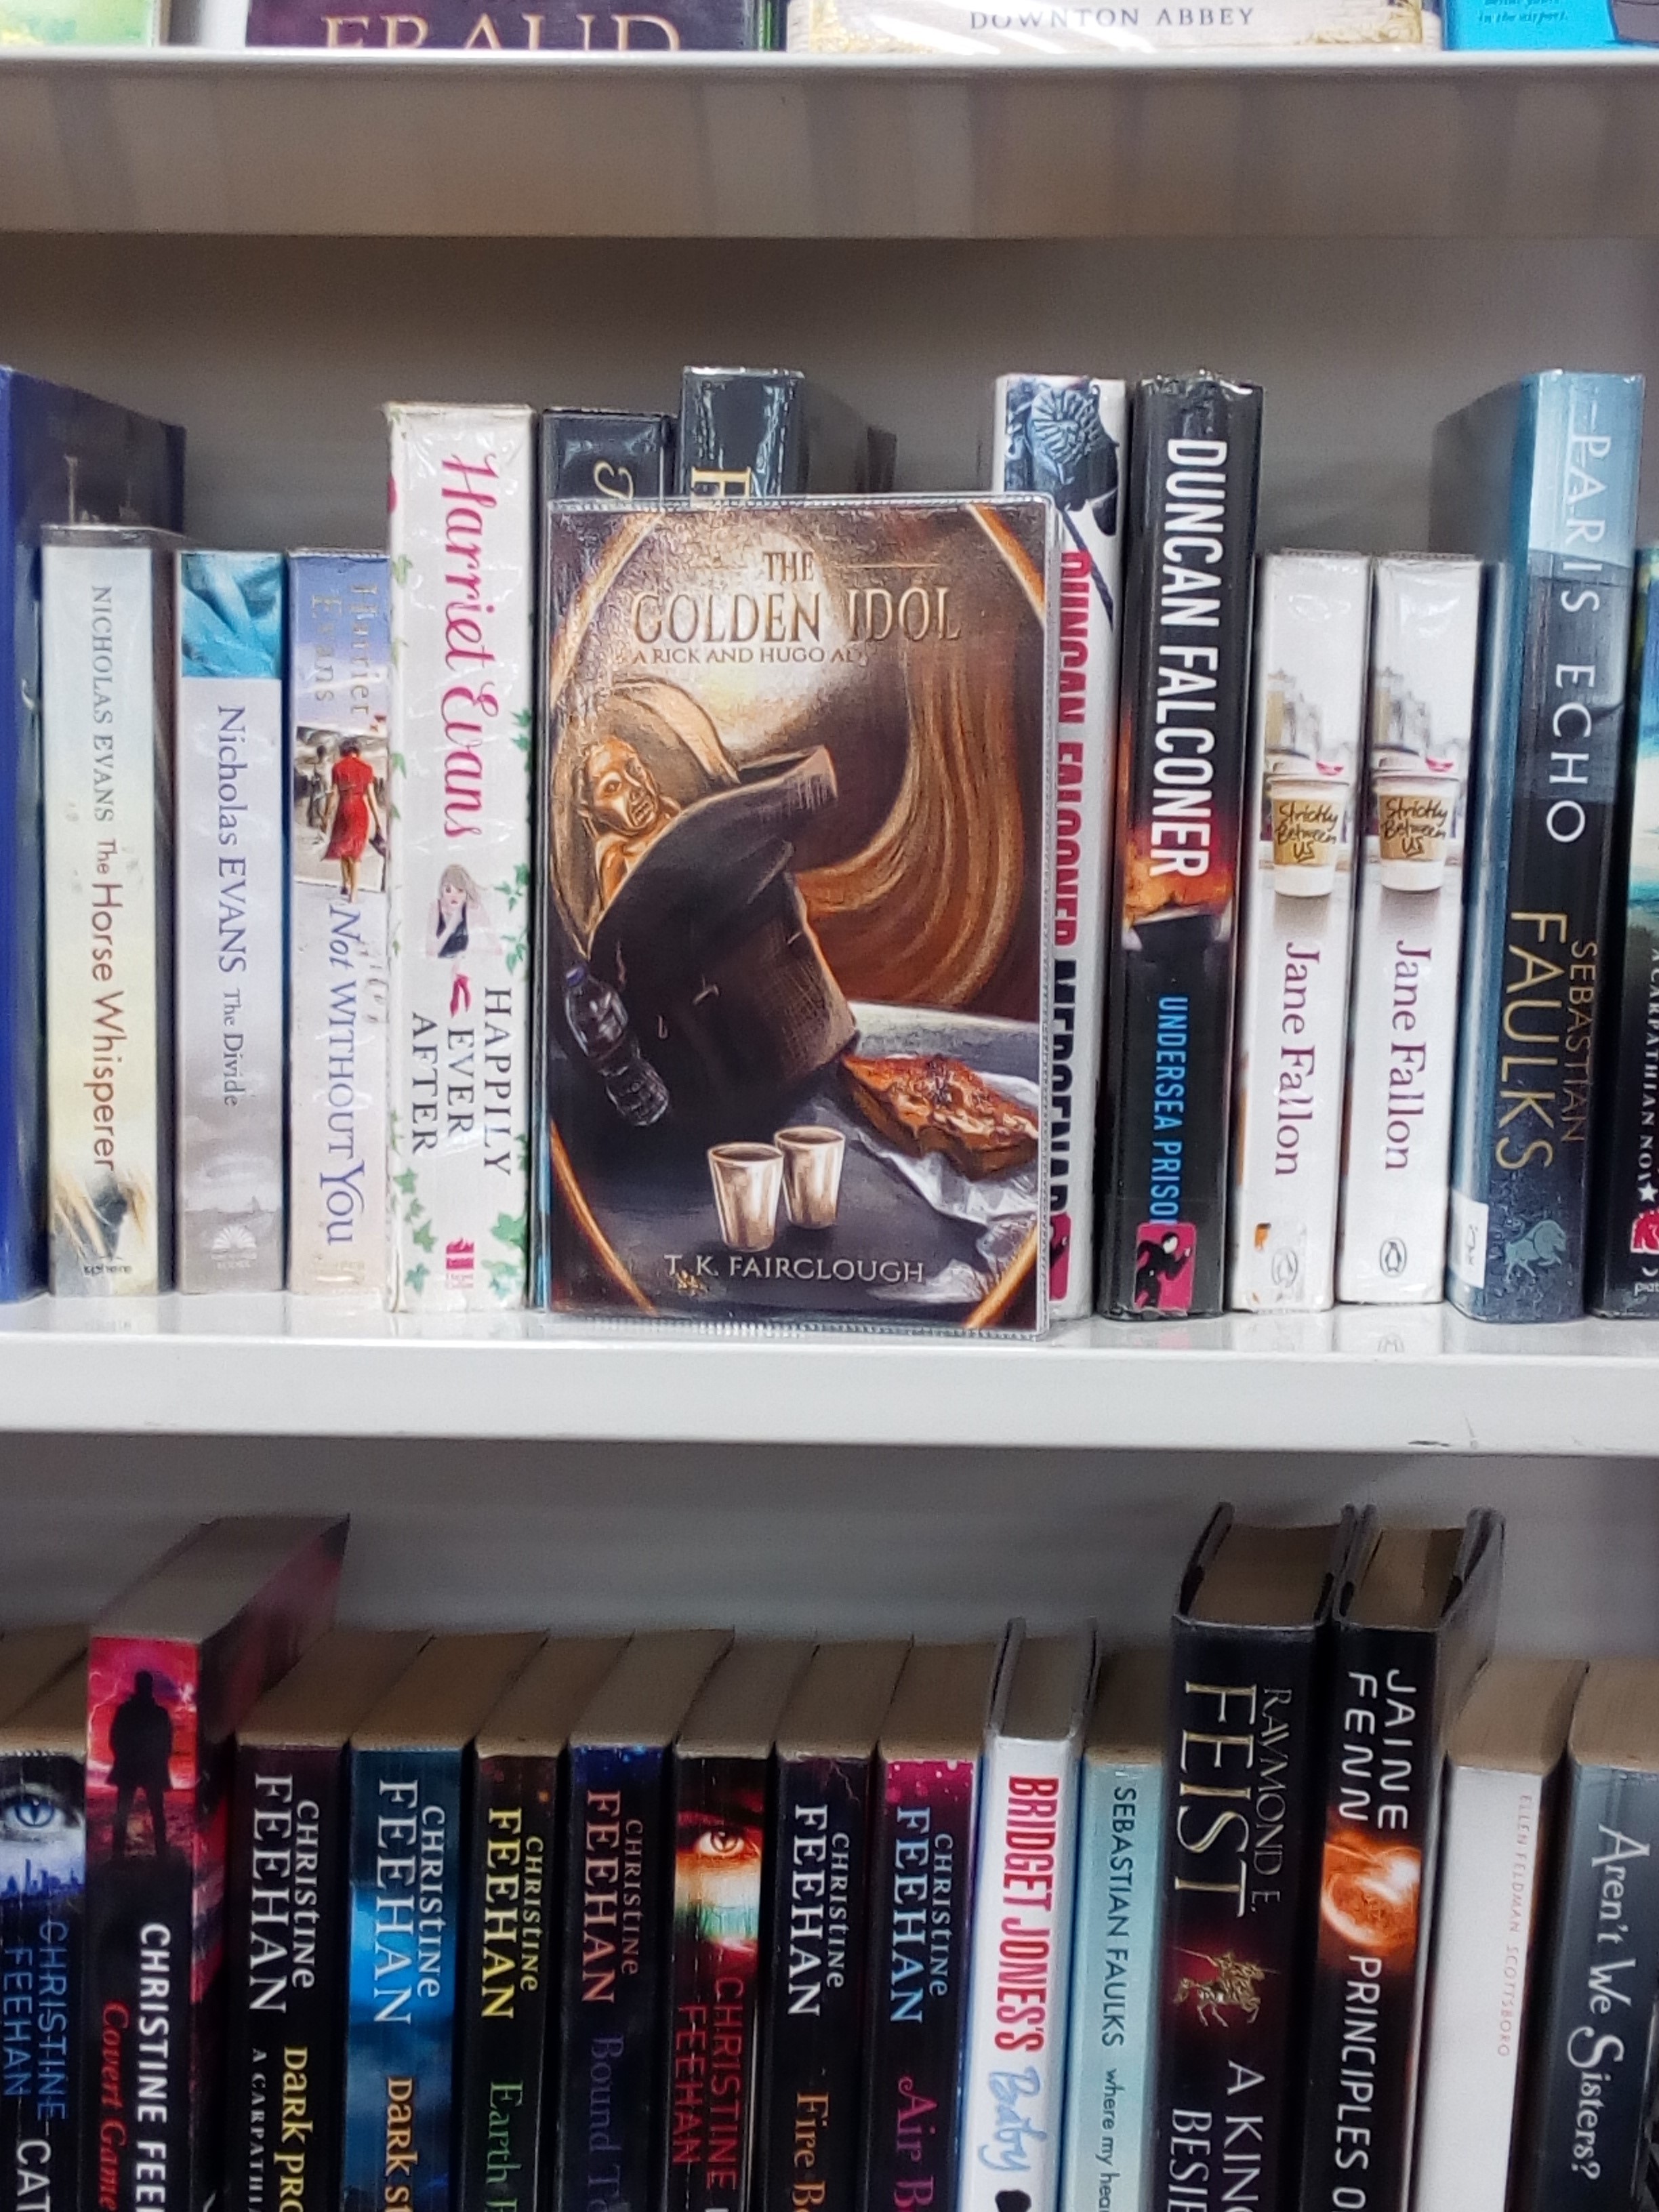 The Golden Idol by T. K. Fairclough featured in 4 local libraries